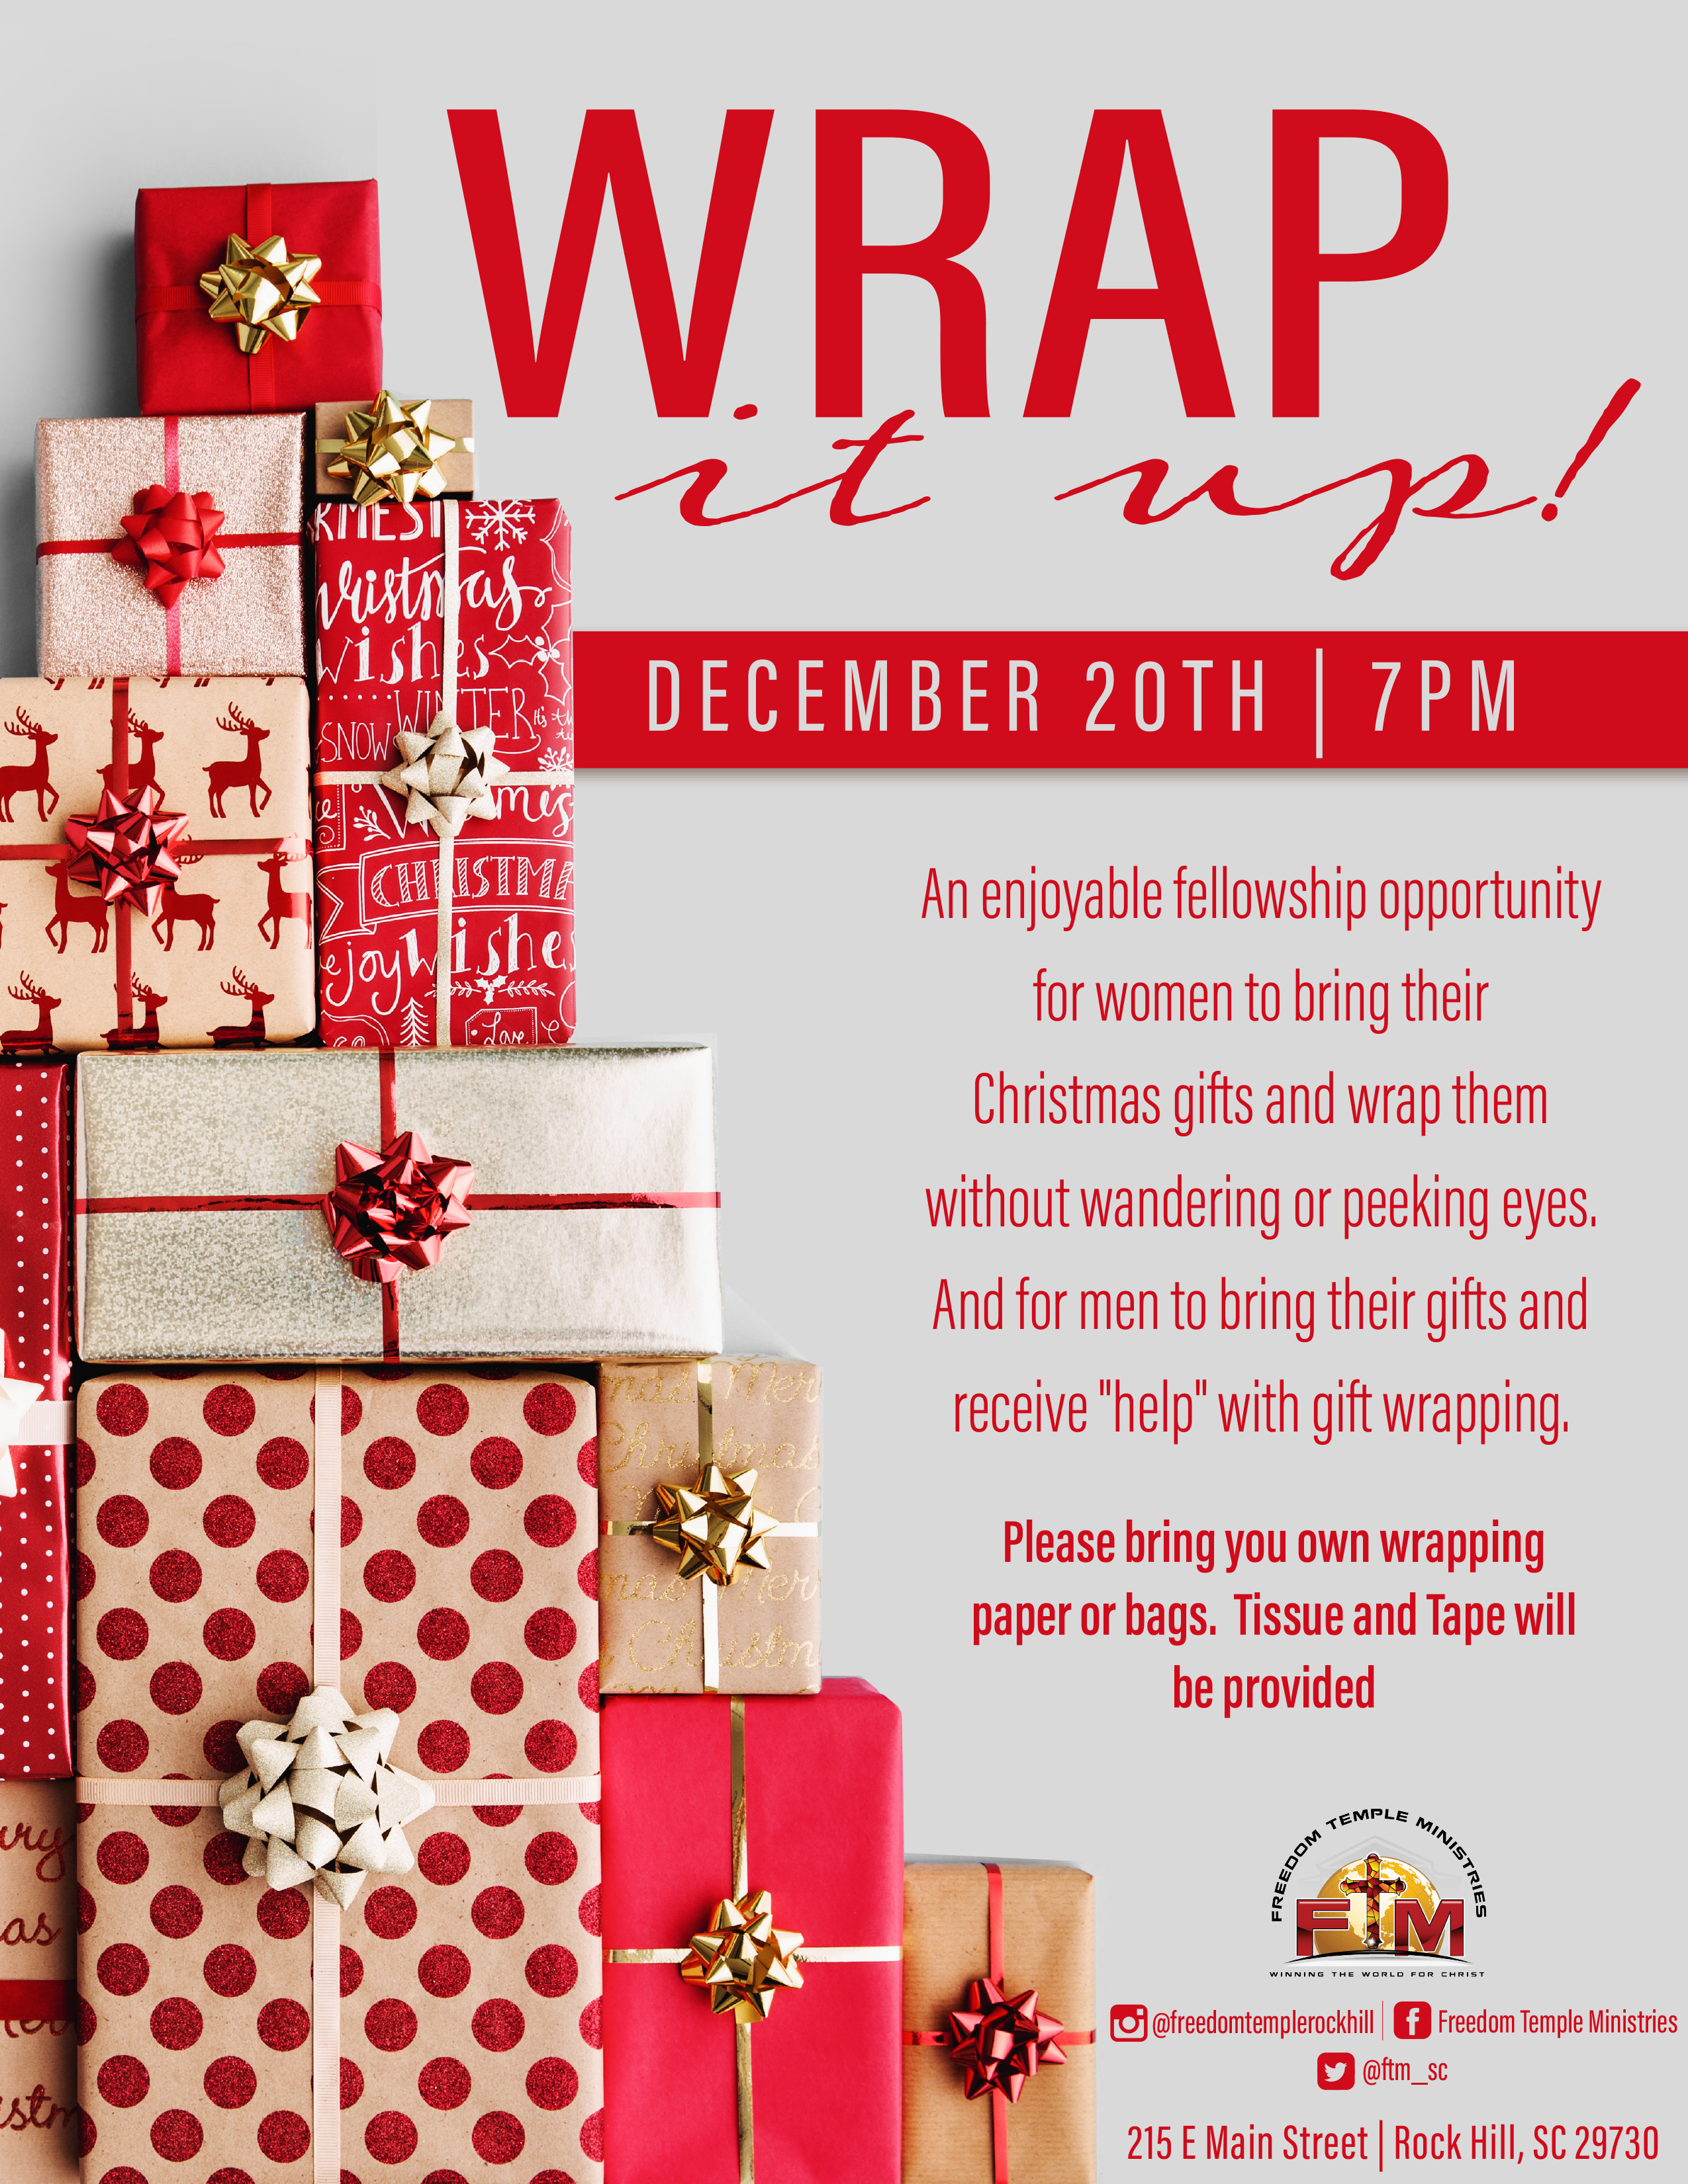 upcoming-events-wrap-it-up-gift-wrapping-session-freedom-temple